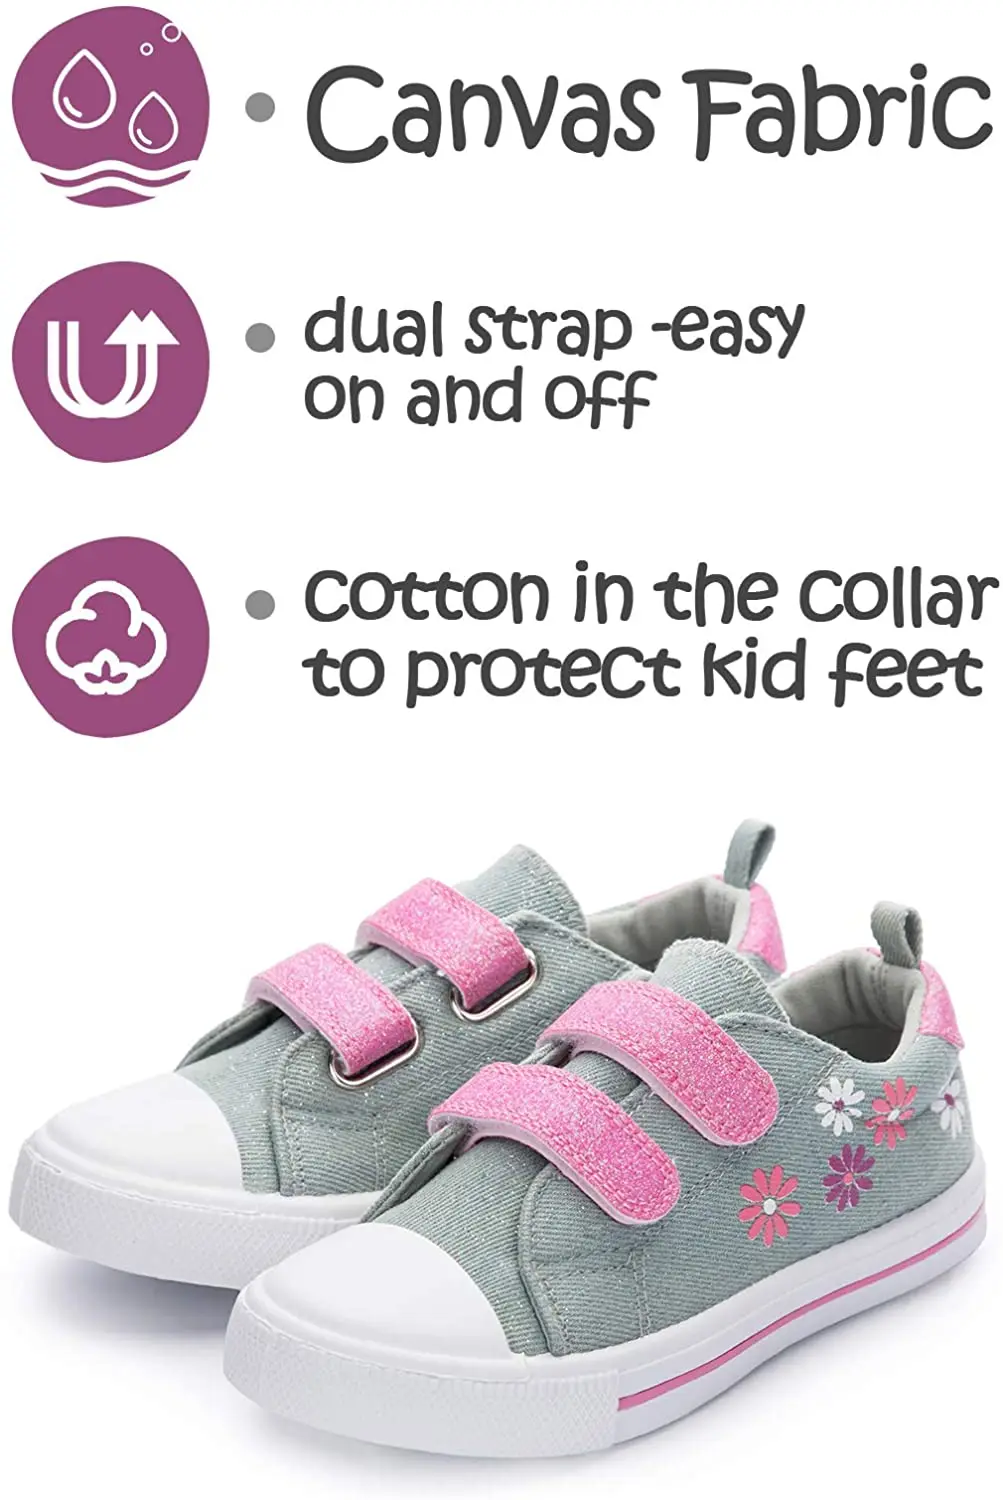 2022 Fashion Sneakers for Boys and Girls,Toddler Kids Soft Walking Shoes